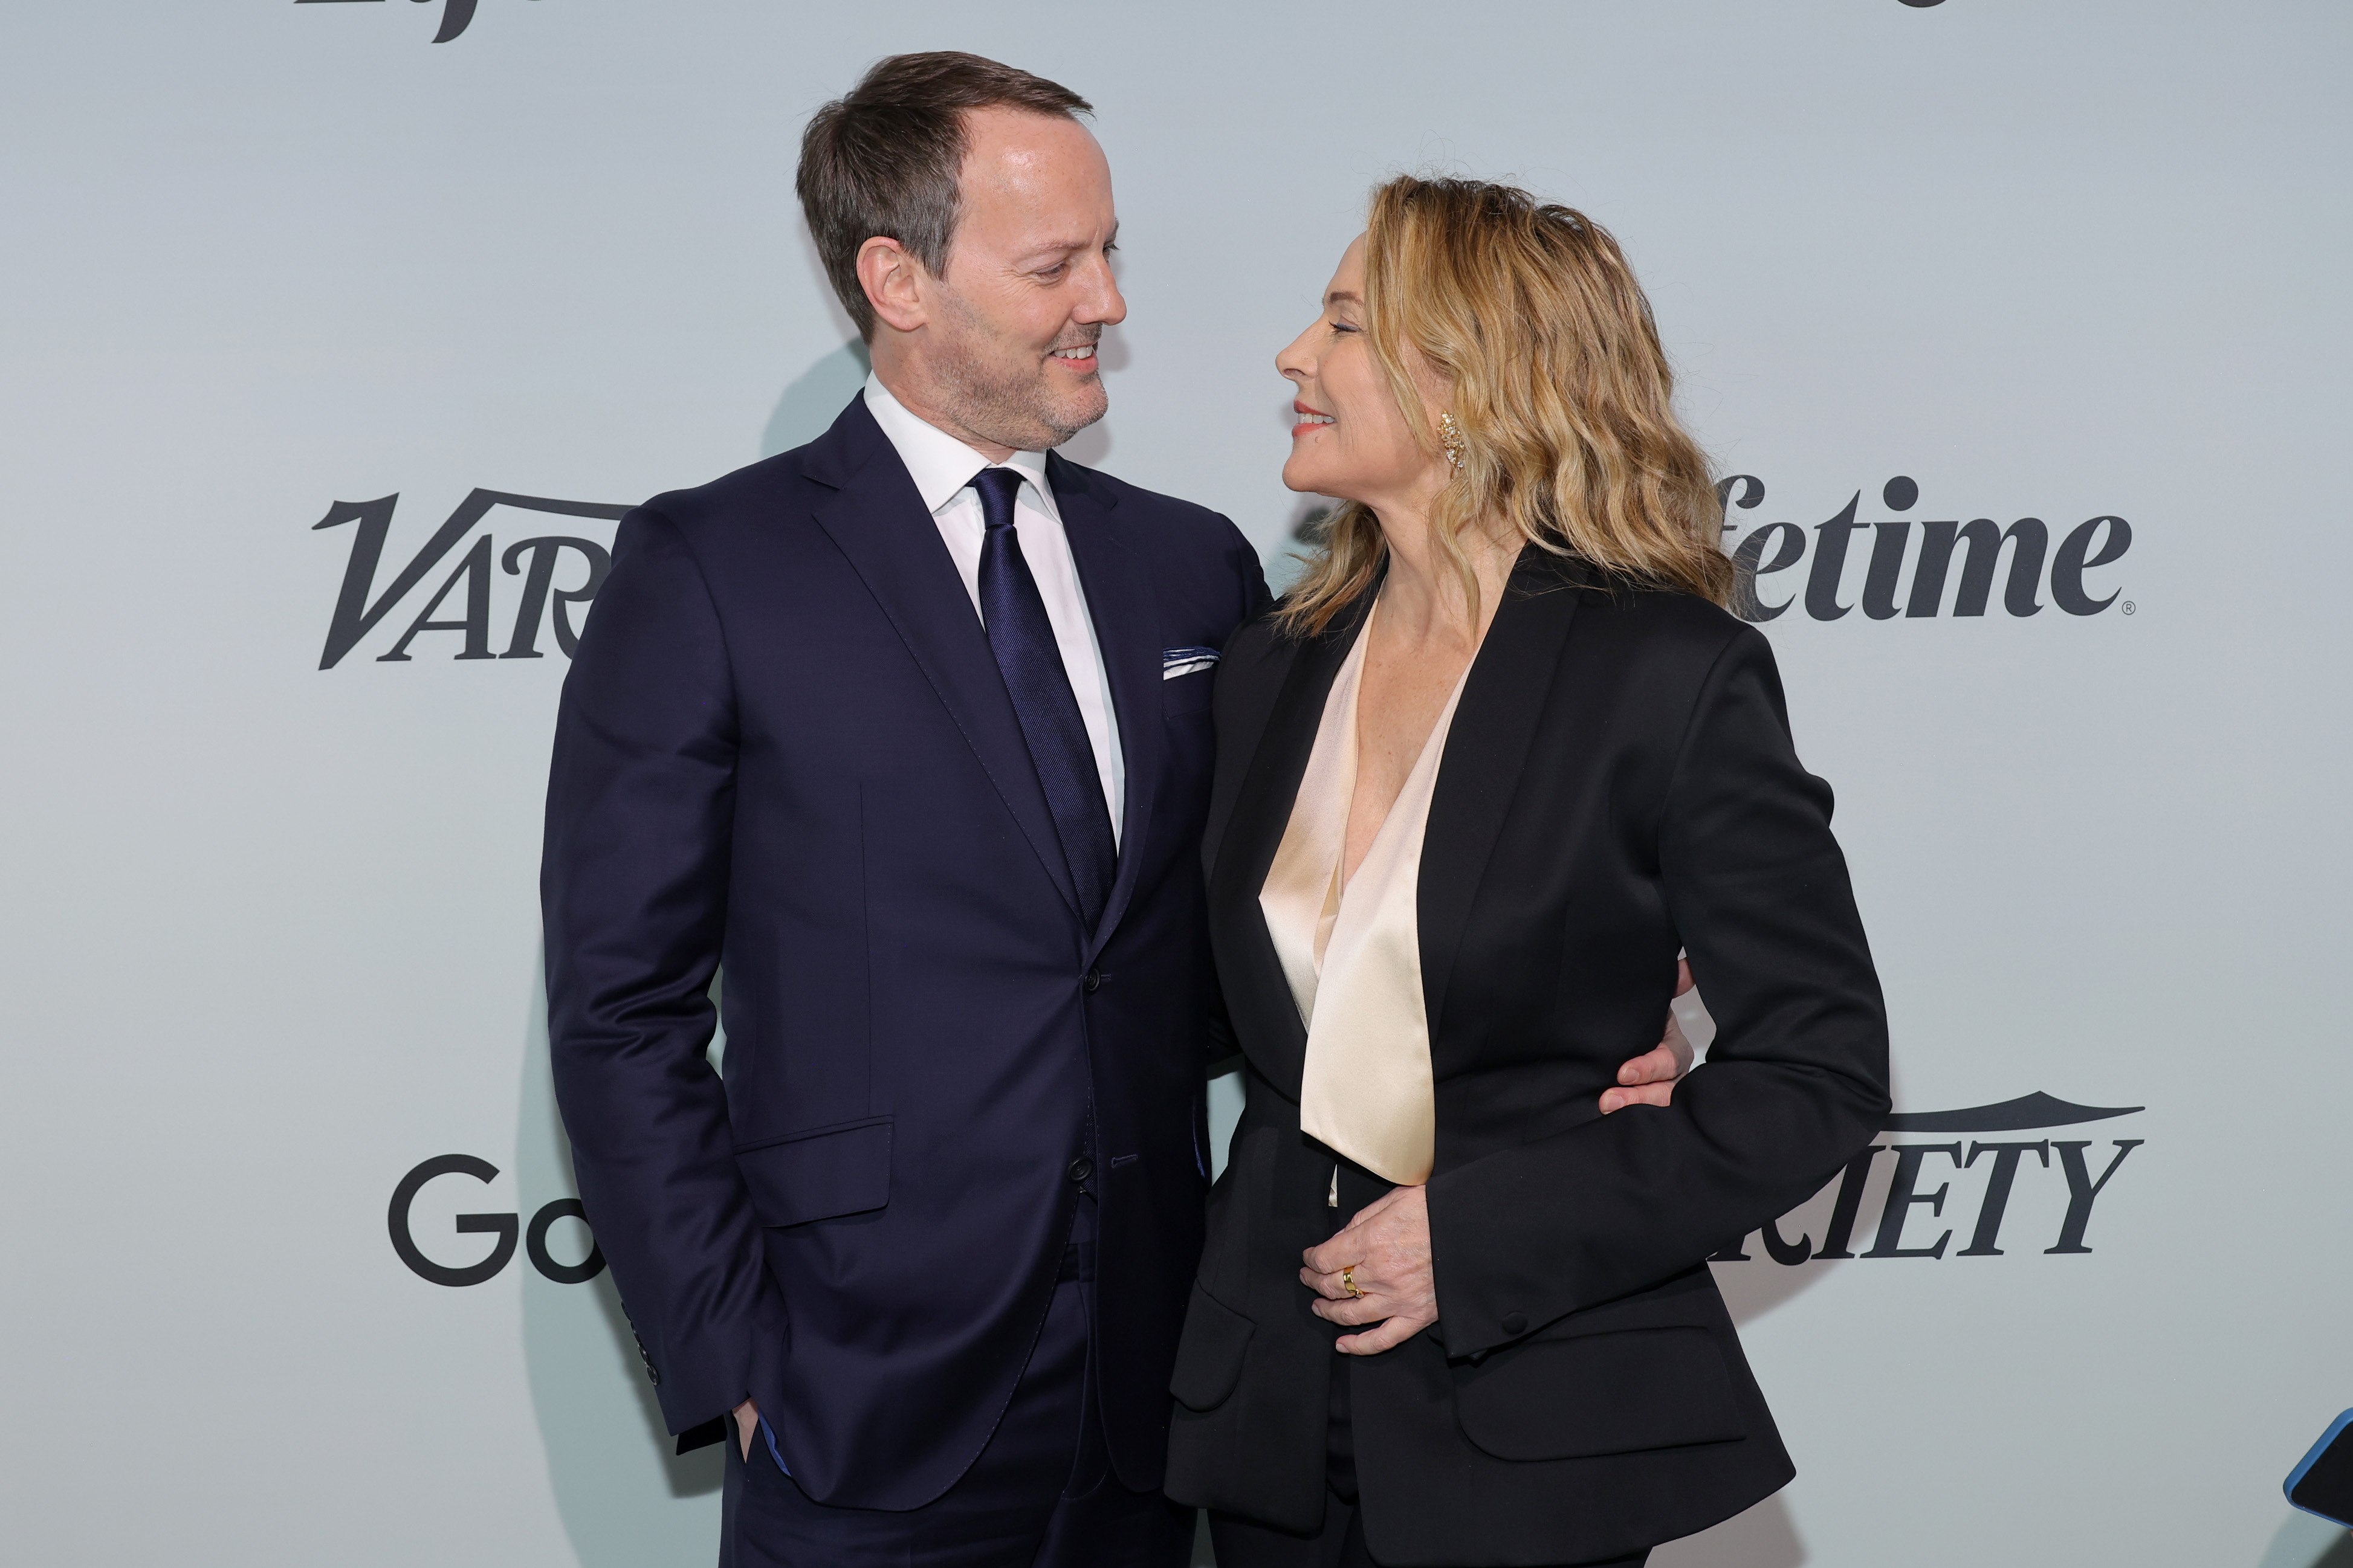 Russell Thomas and Kim Cattrall at Variety's 2022 Power Of Women: New York Event in New York City on May 5, 2022 | Source: Getty Images